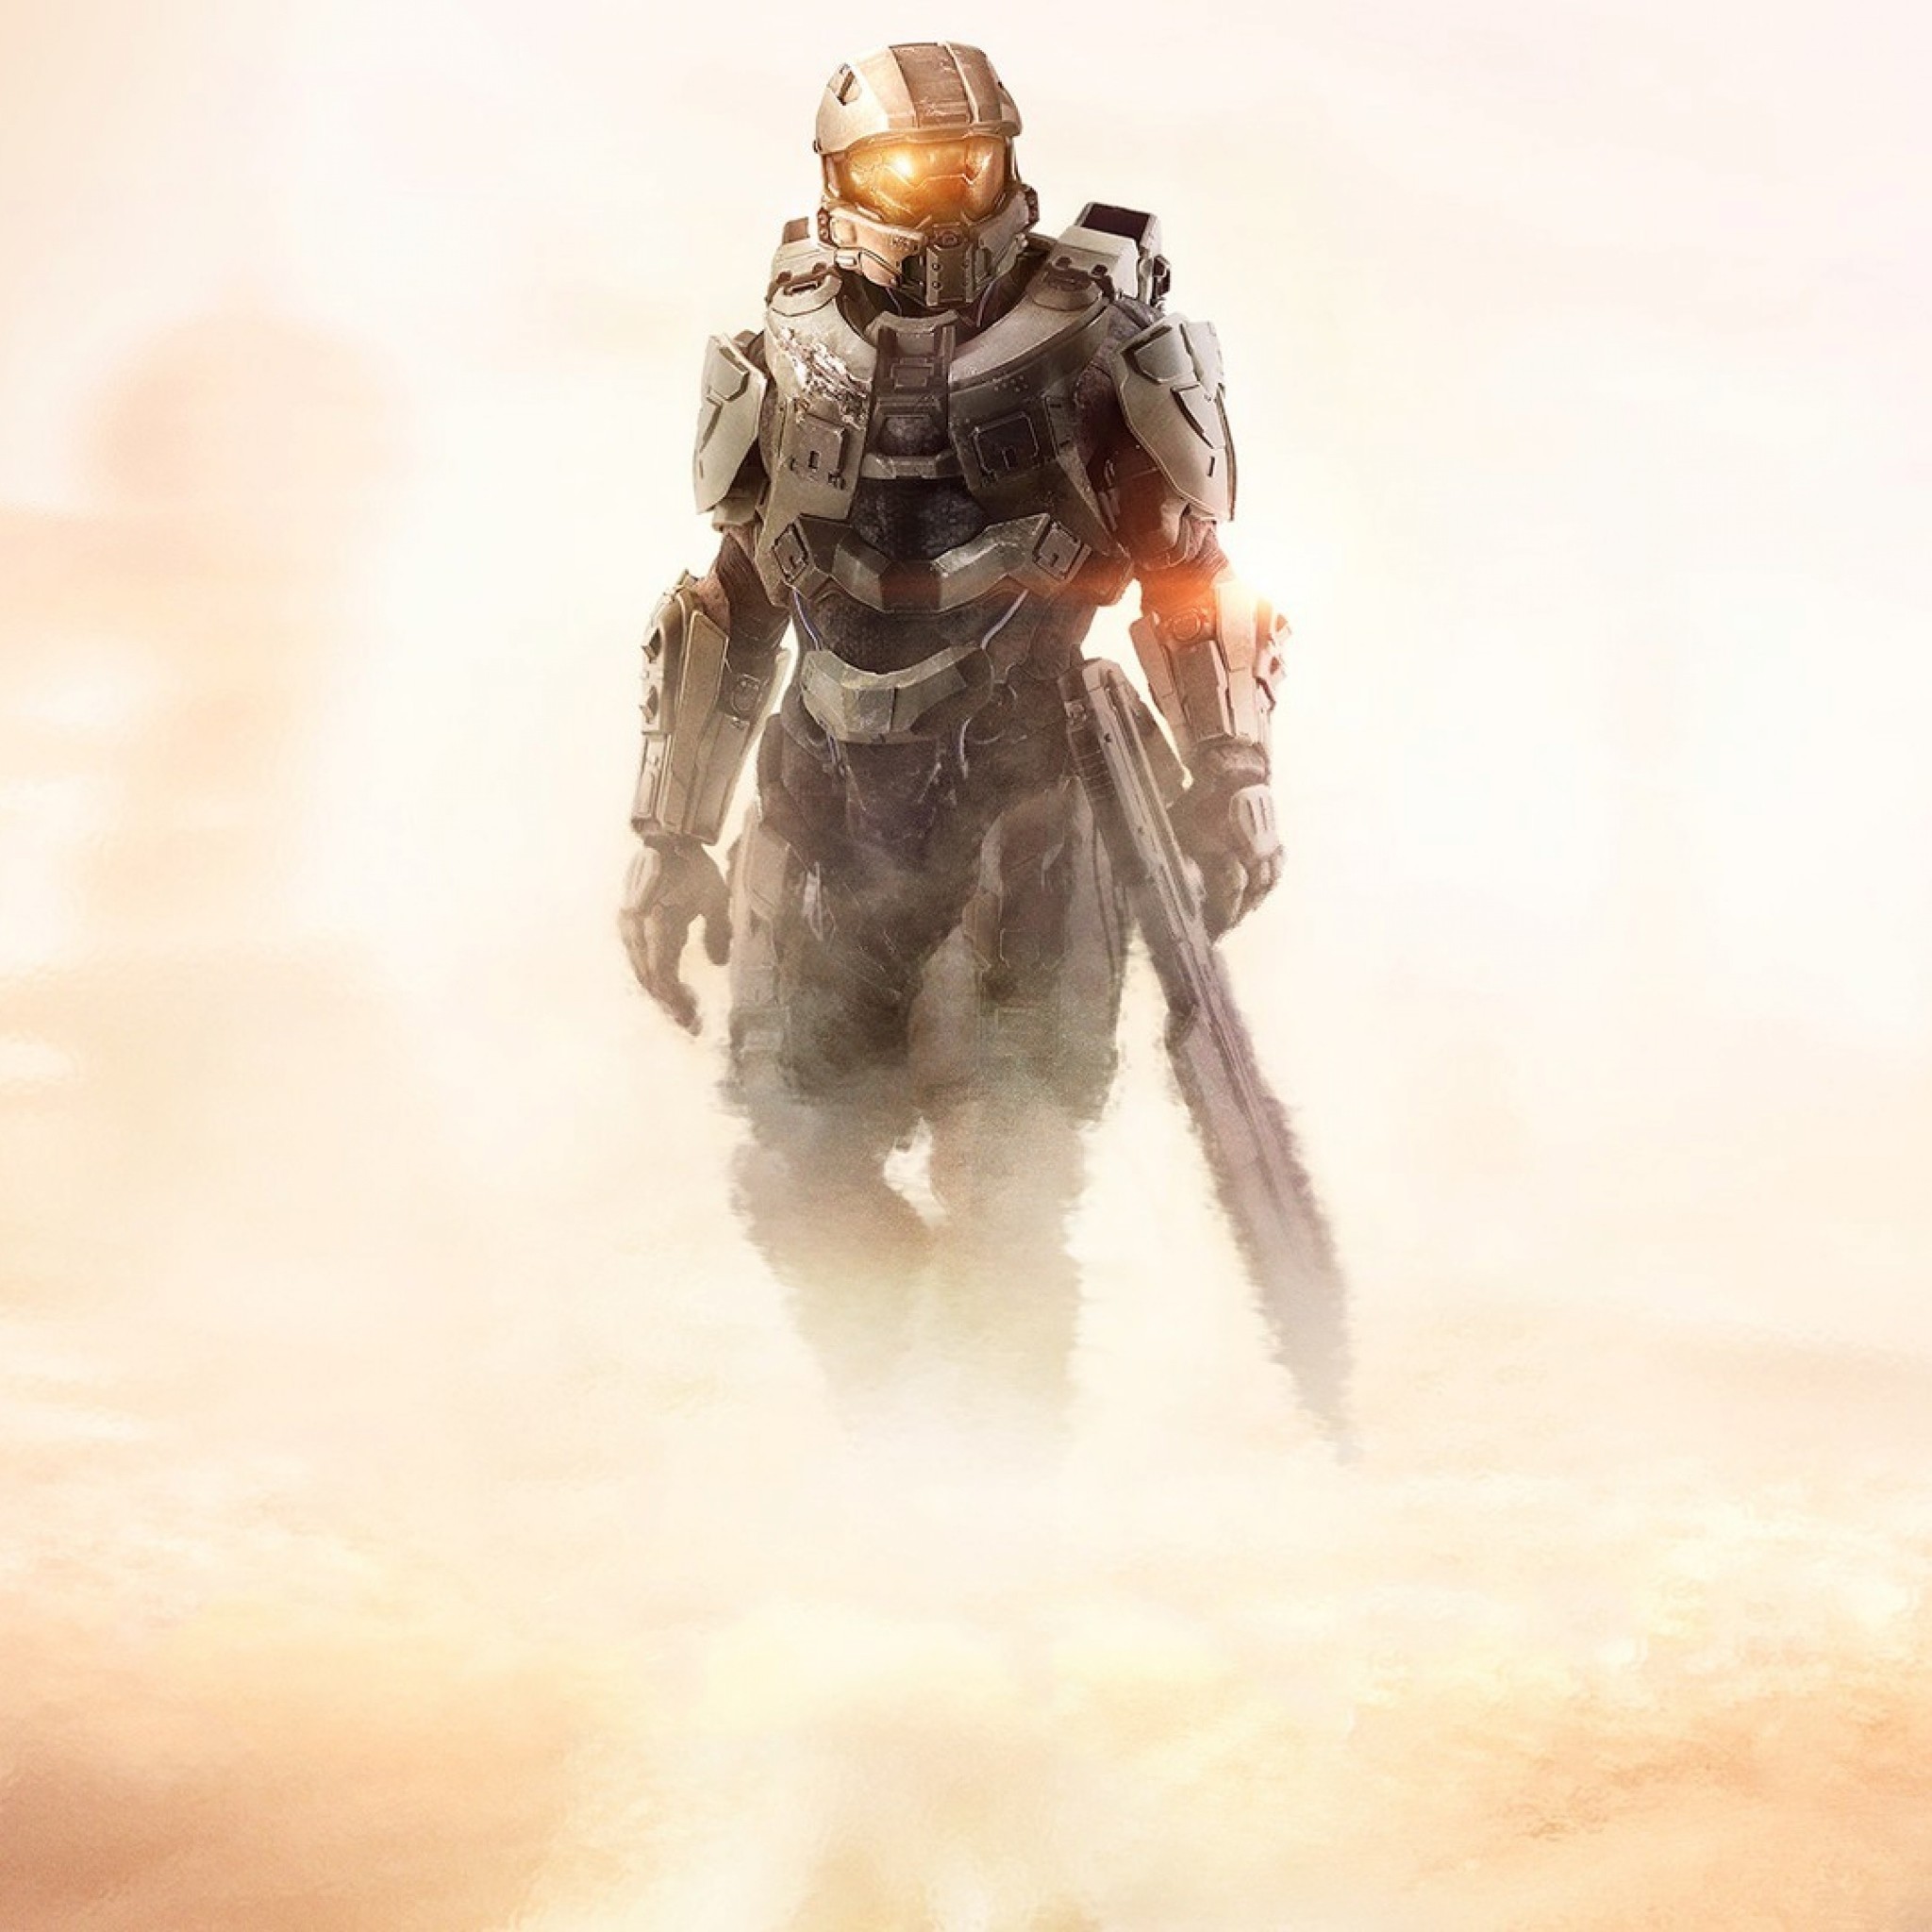 Halo Master Chief Art Wallpapers  Cool Halo Wallpaper for iPhone